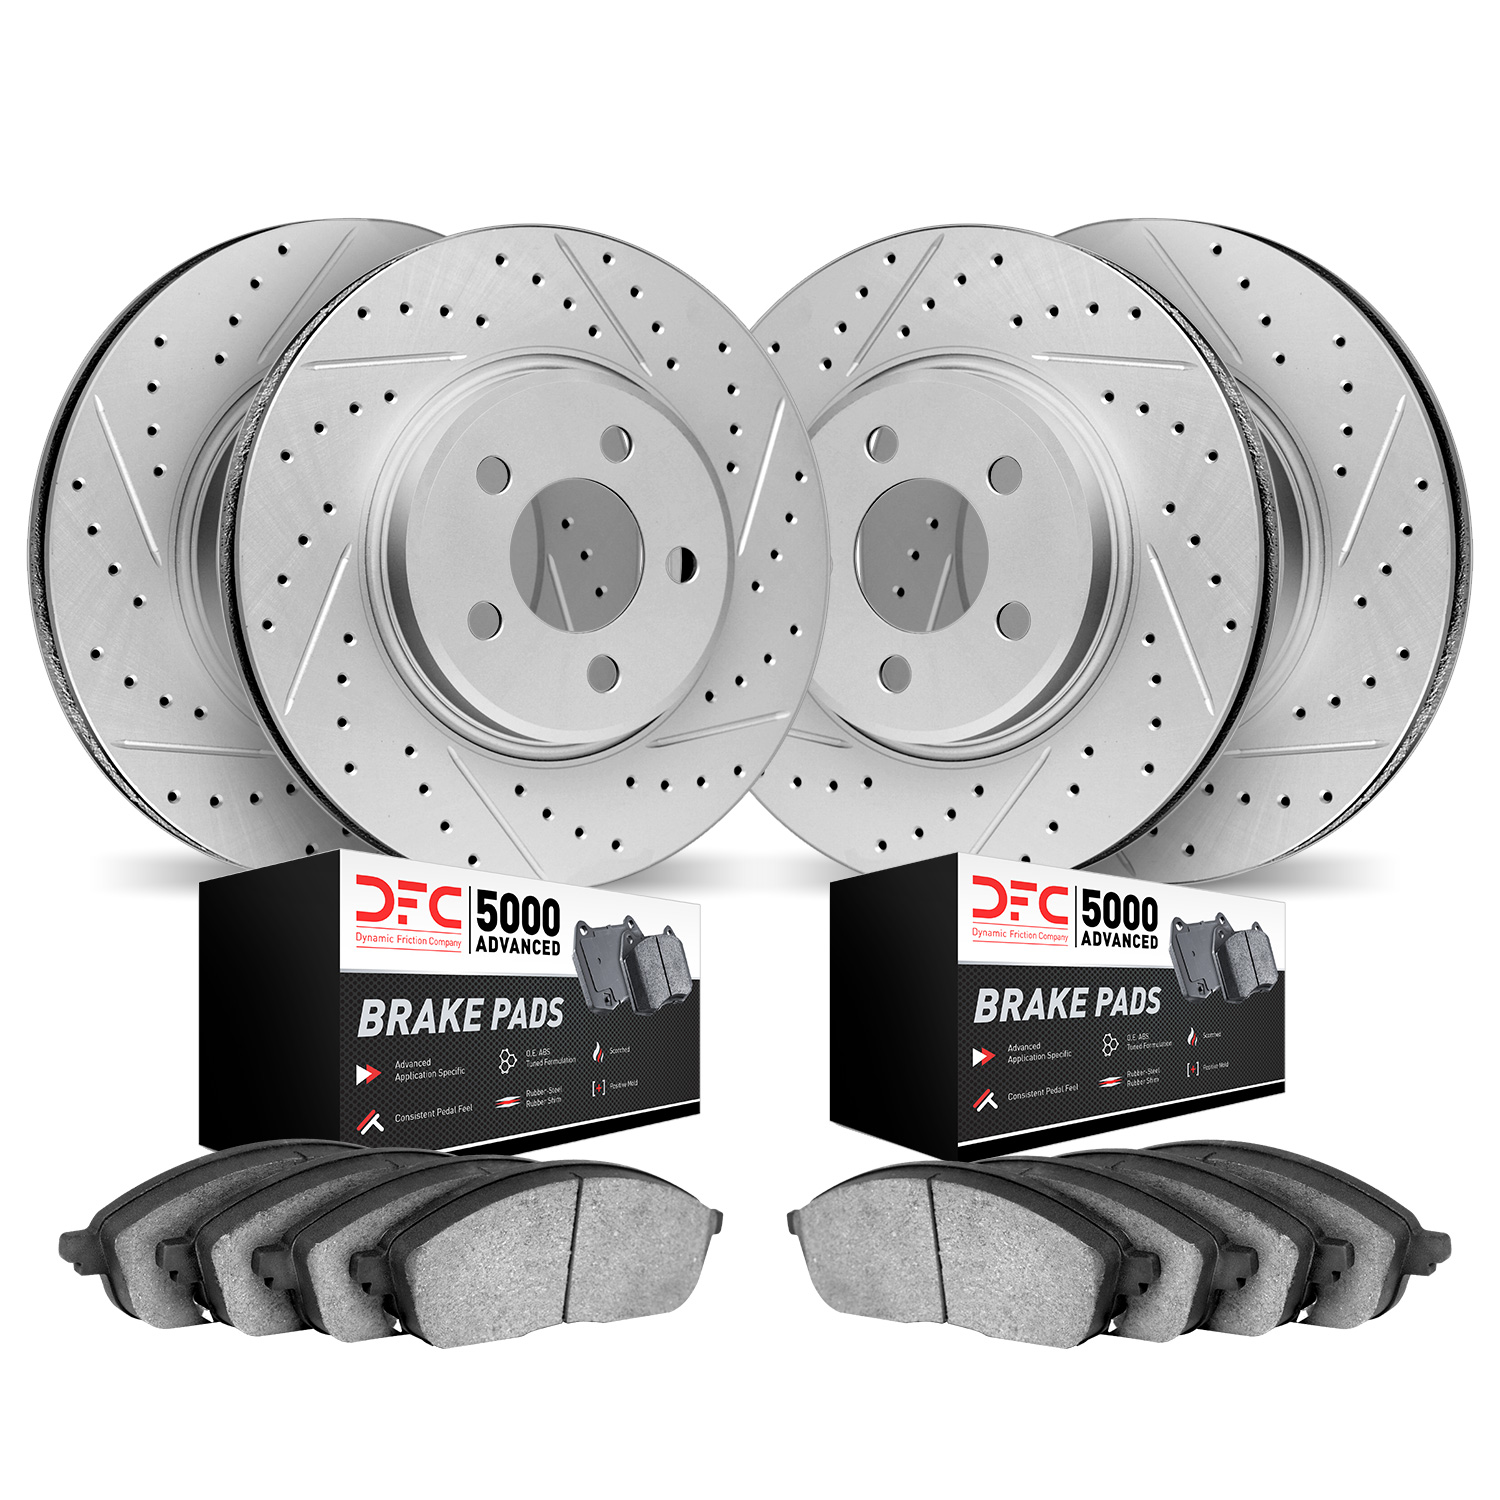 2504-46011 Geoperformance Drilled/Slotted Rotors w/5000 Advanced Brake Pads Kit, 2003-2007 GM, Position: Front and Rear